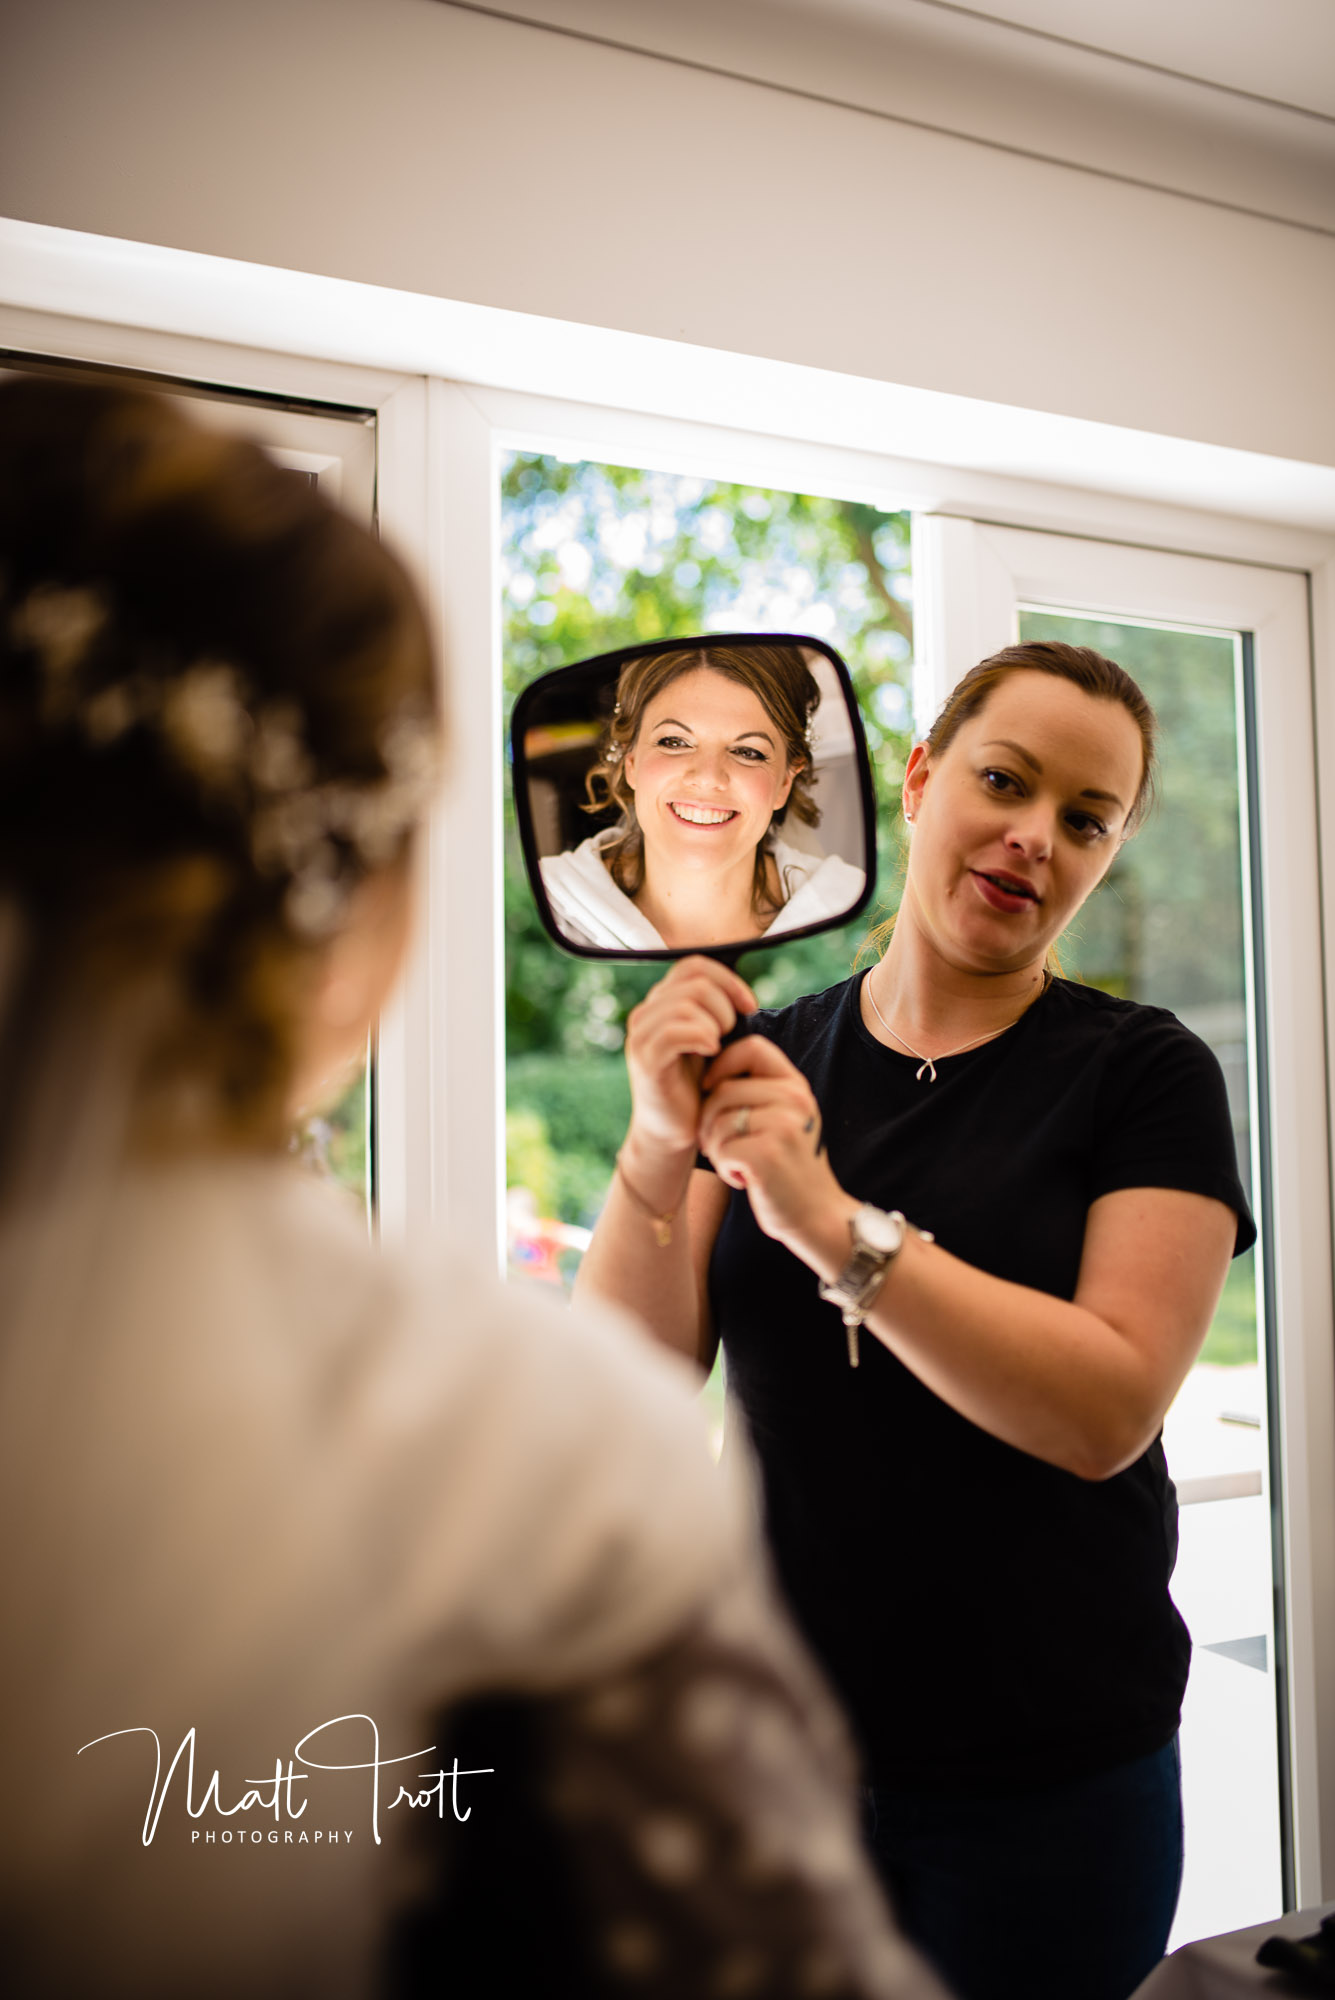 MUA holds up mirror for the sitting bride to see herself